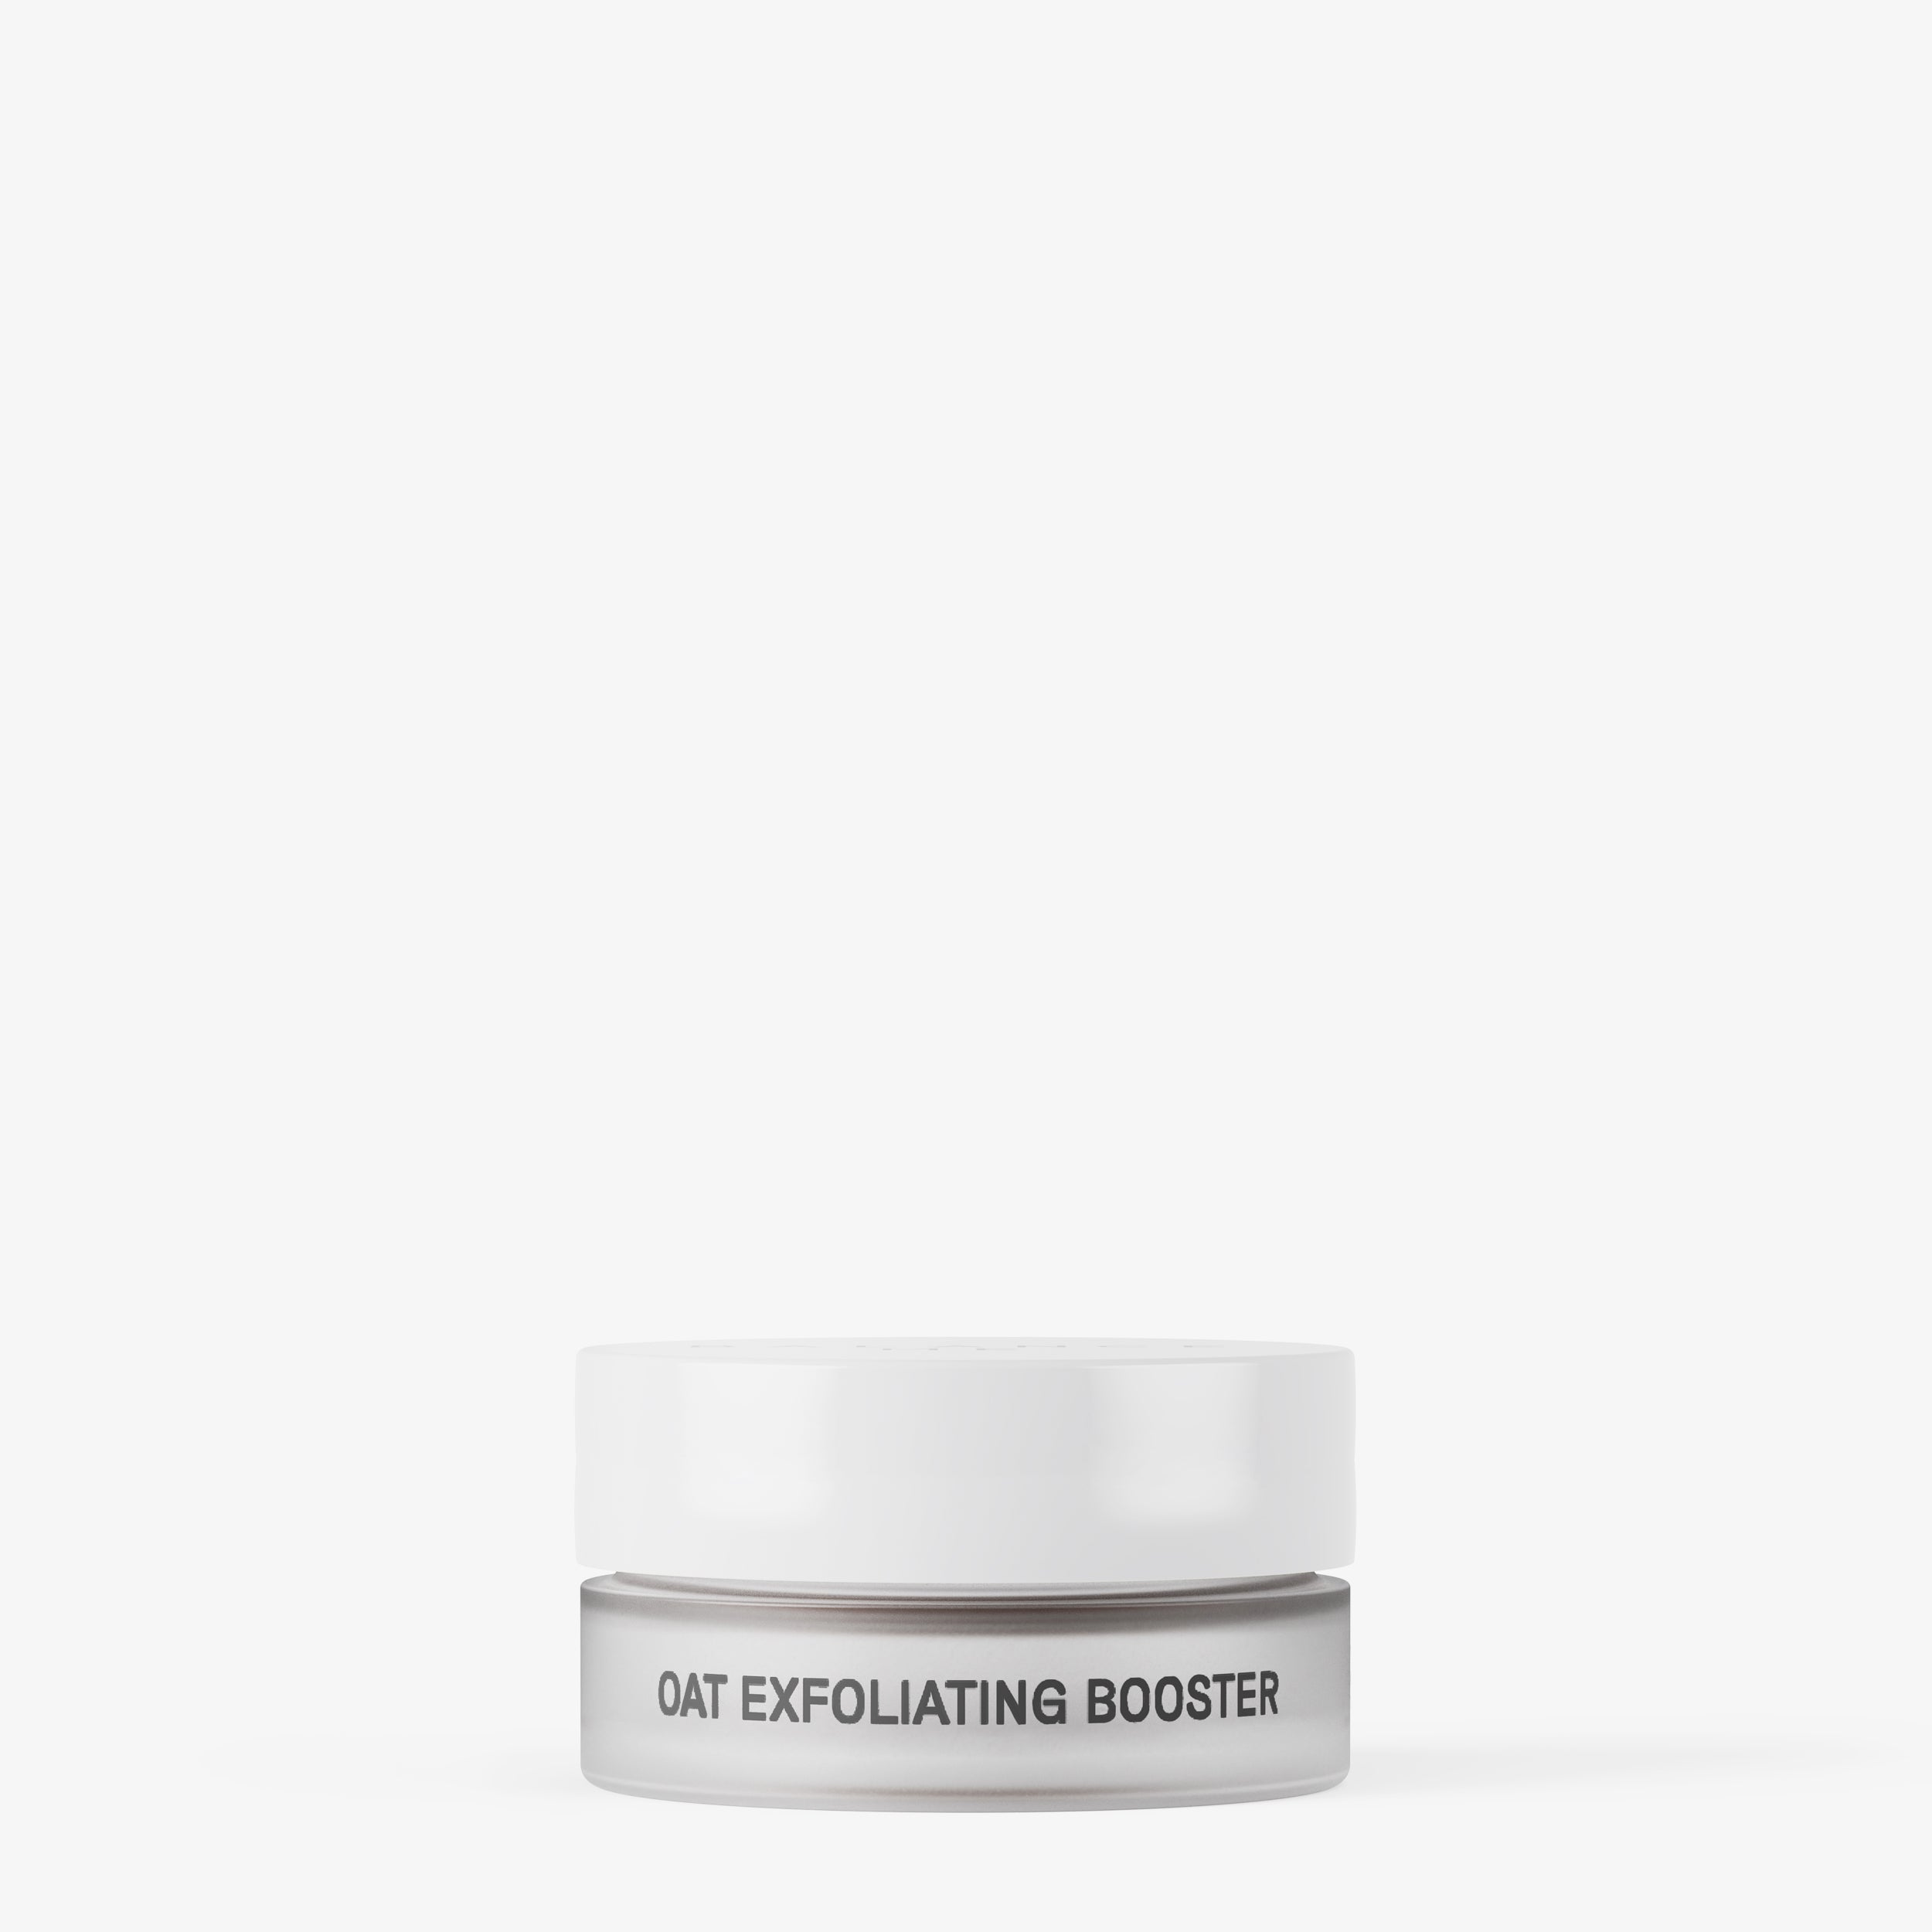 Oat Exfoliating Booster 2g